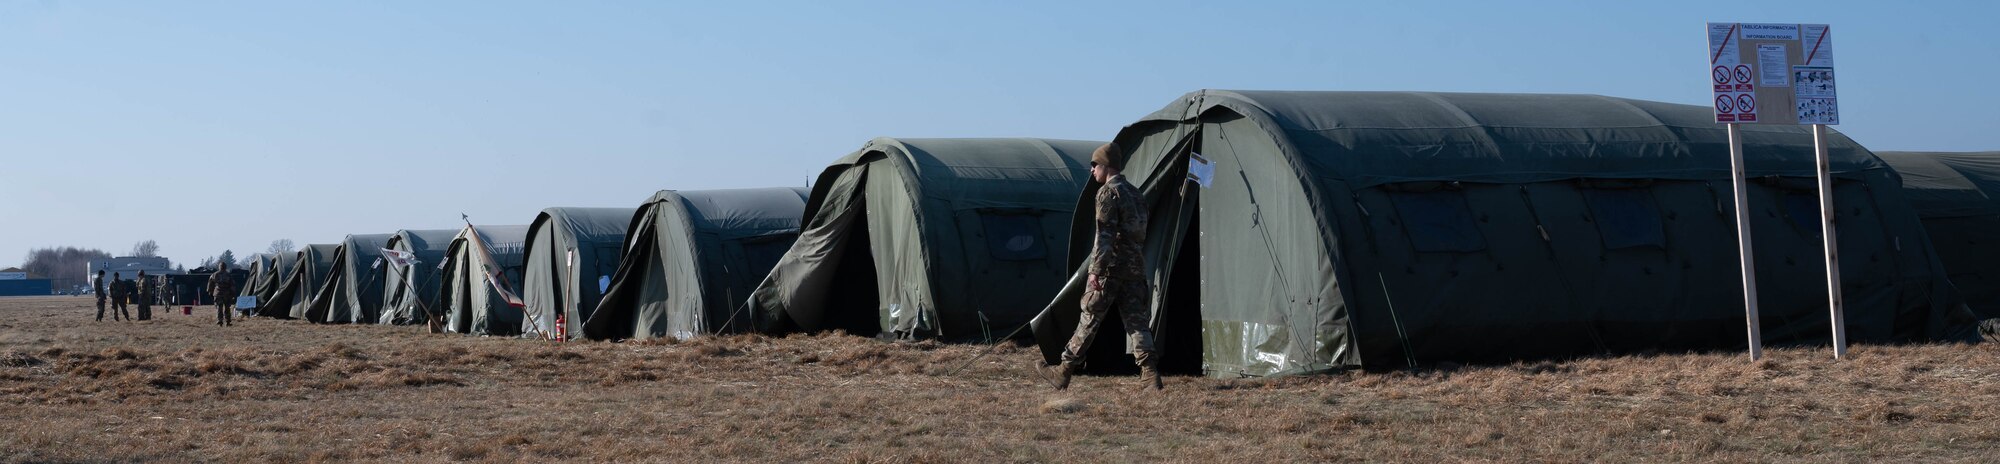 U.S. Army tents rest at Mielec Airport.